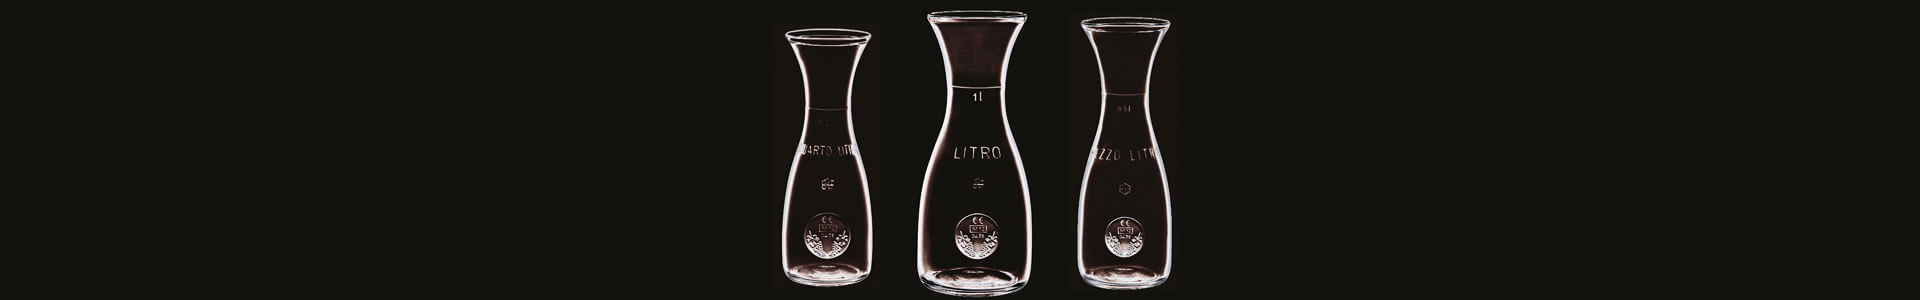 Three carafes from Bormioli Rocco's Misura series in different sizes.